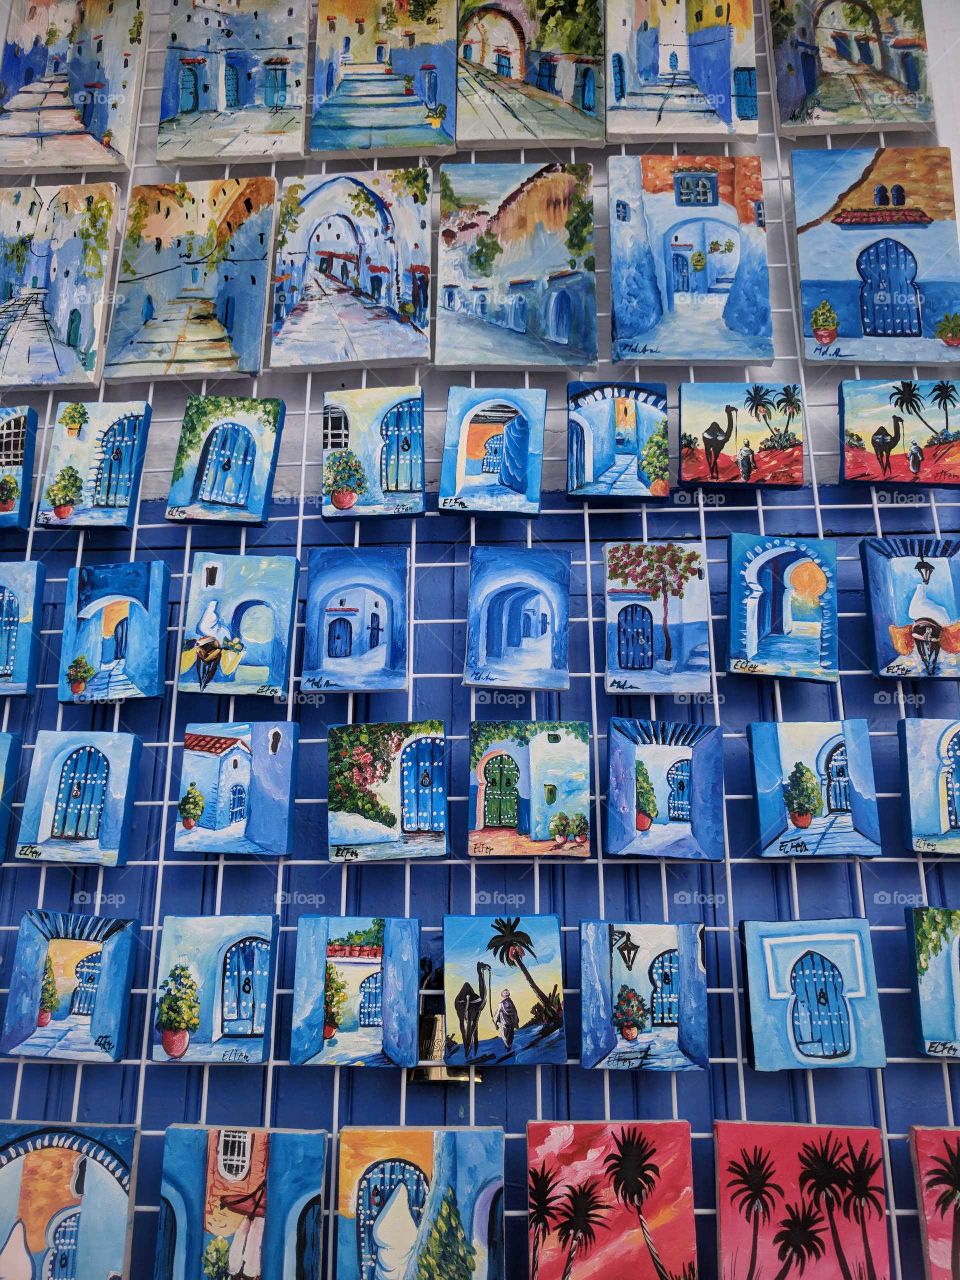 Artwork/Paintings of the Blue Buildings, Homes, Arches, and Doors of Chefchaouen by Local Artists (Street Market of Chefchaouen, the Blue City, in Morocco)